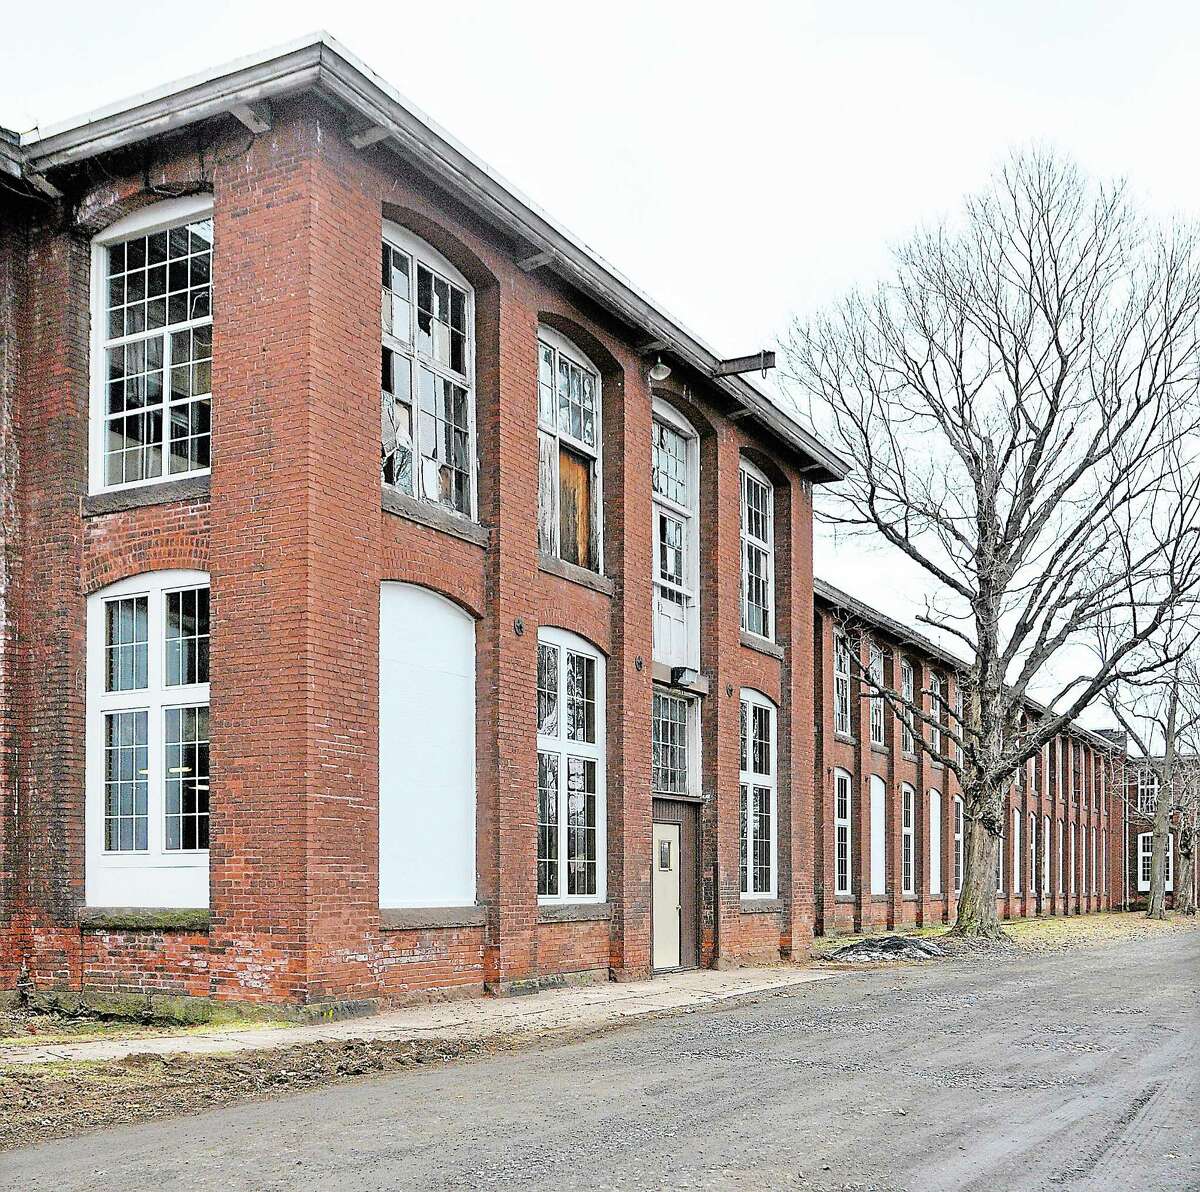 The Remington Rand Building at 180 Johnson Street in Middletown.